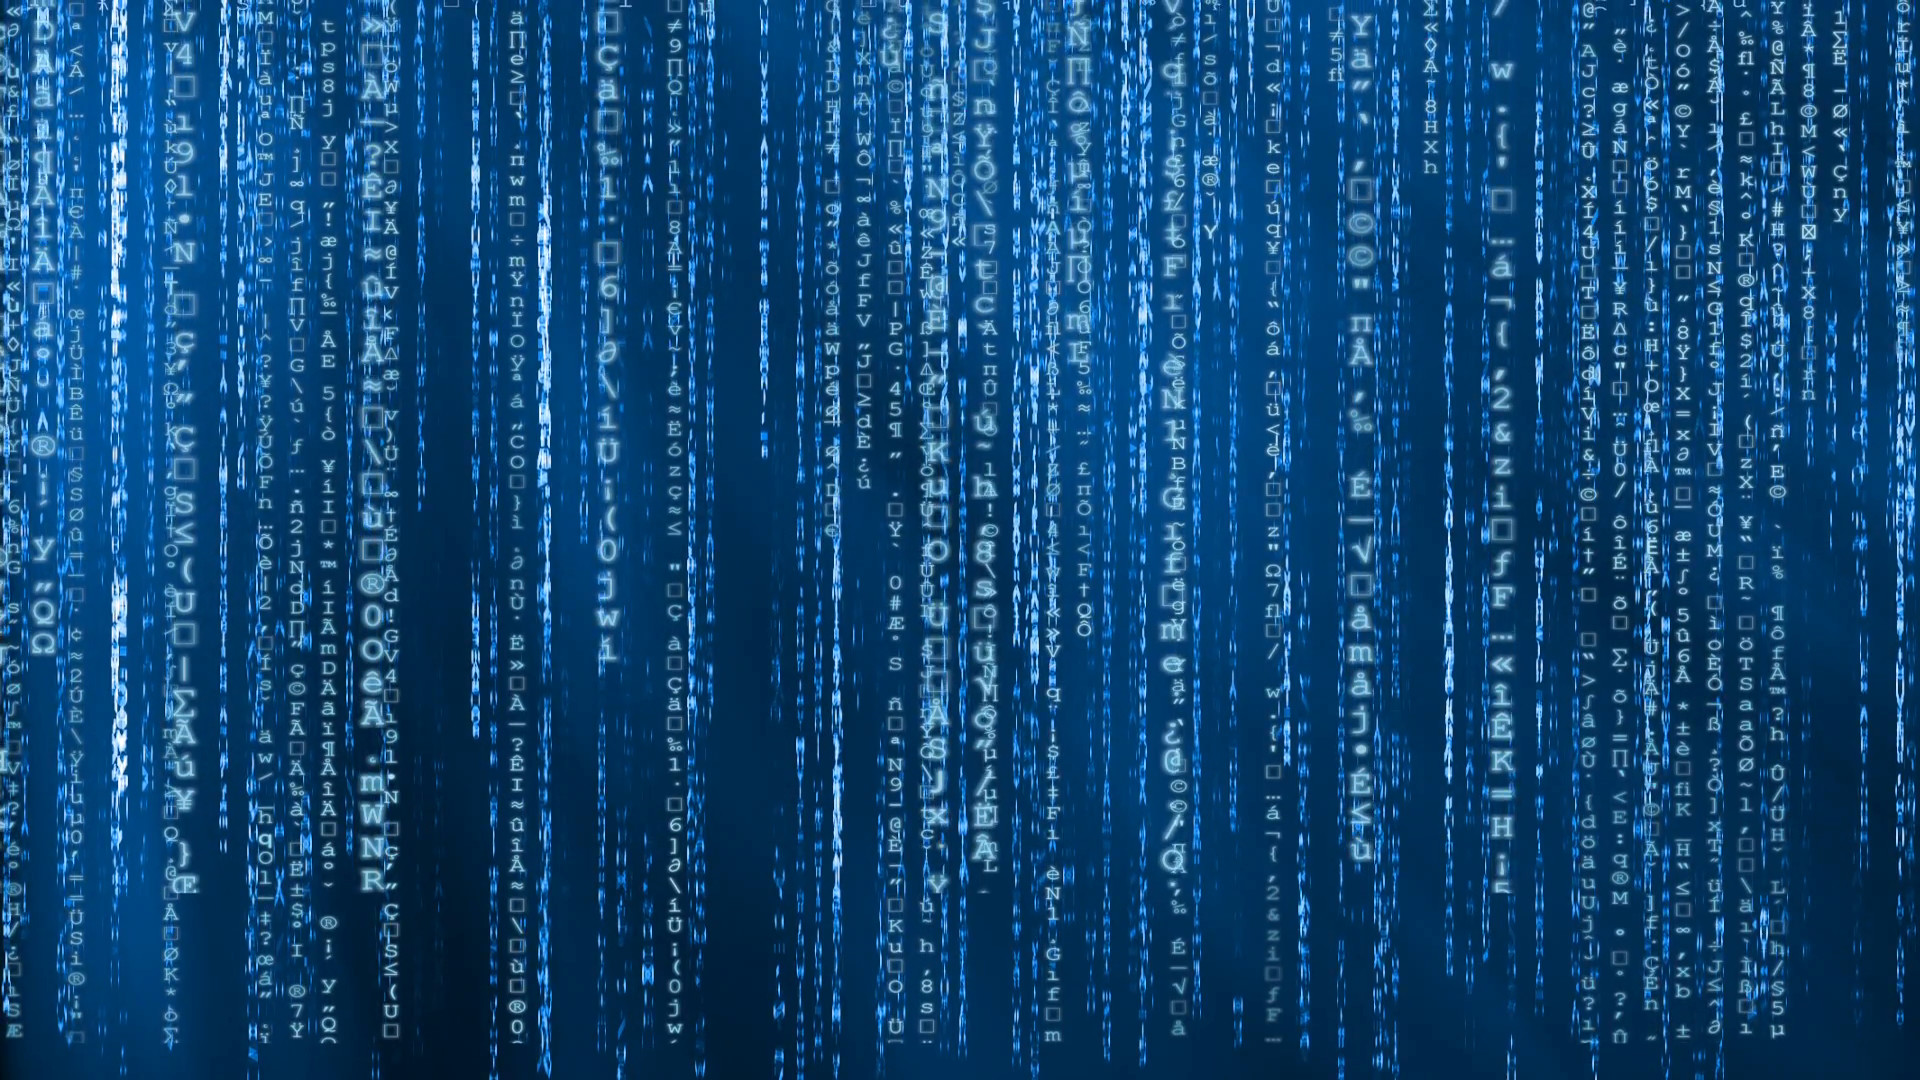 1920x1080 Blue animated matrix background, computer code with symbols and characters.  Motion Background - VideoBlocks ...